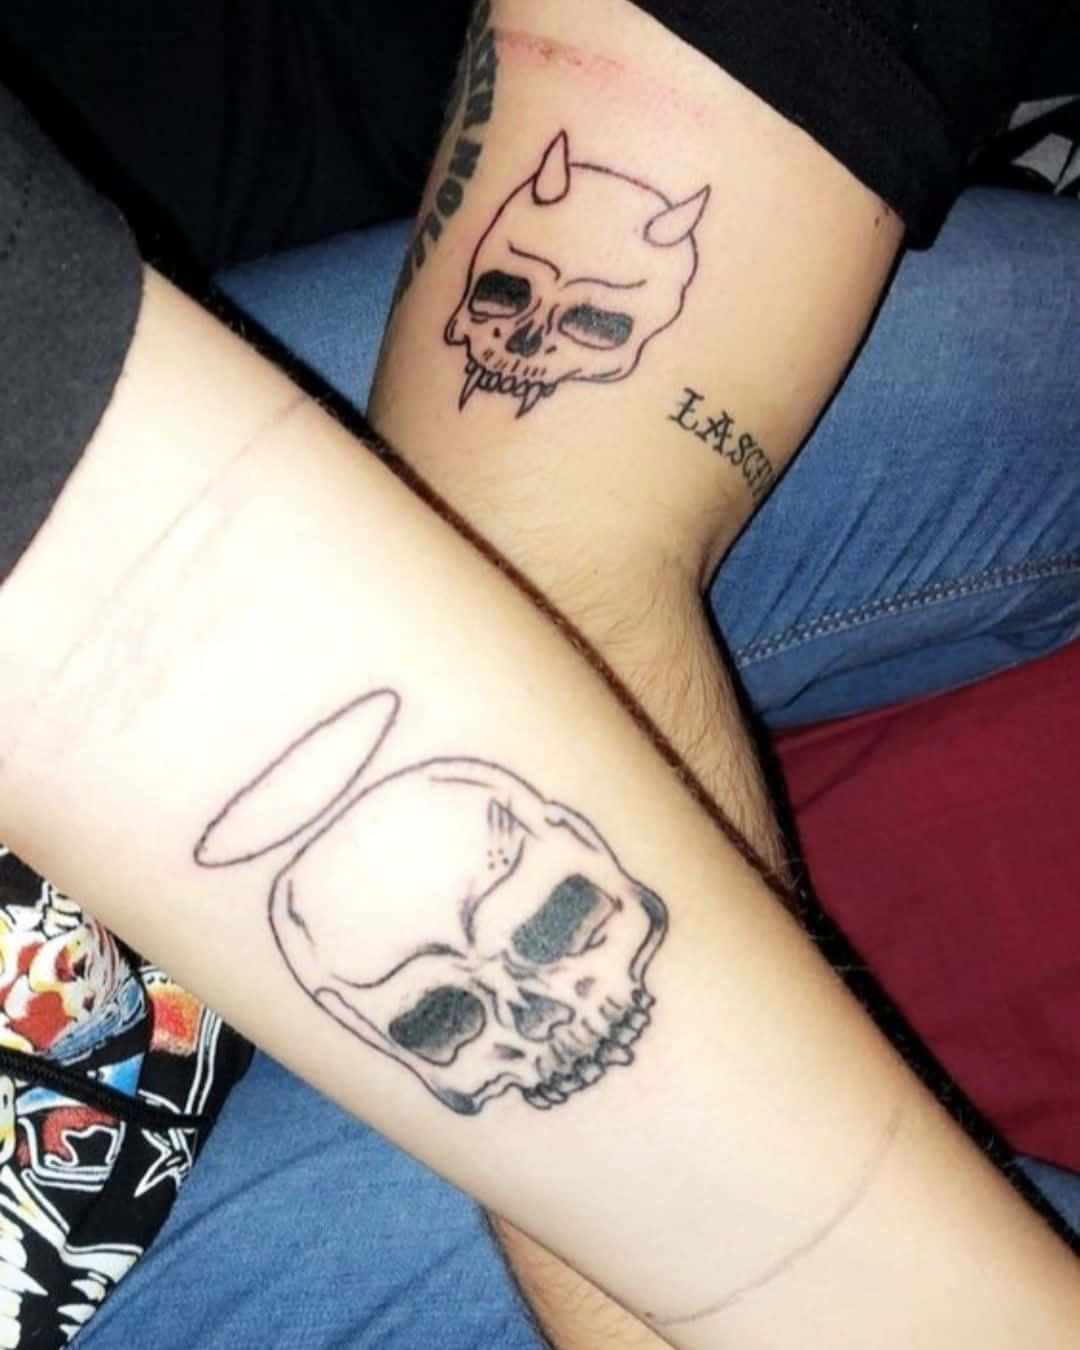 Tattoos Matching Skull Design On Arm Pictures